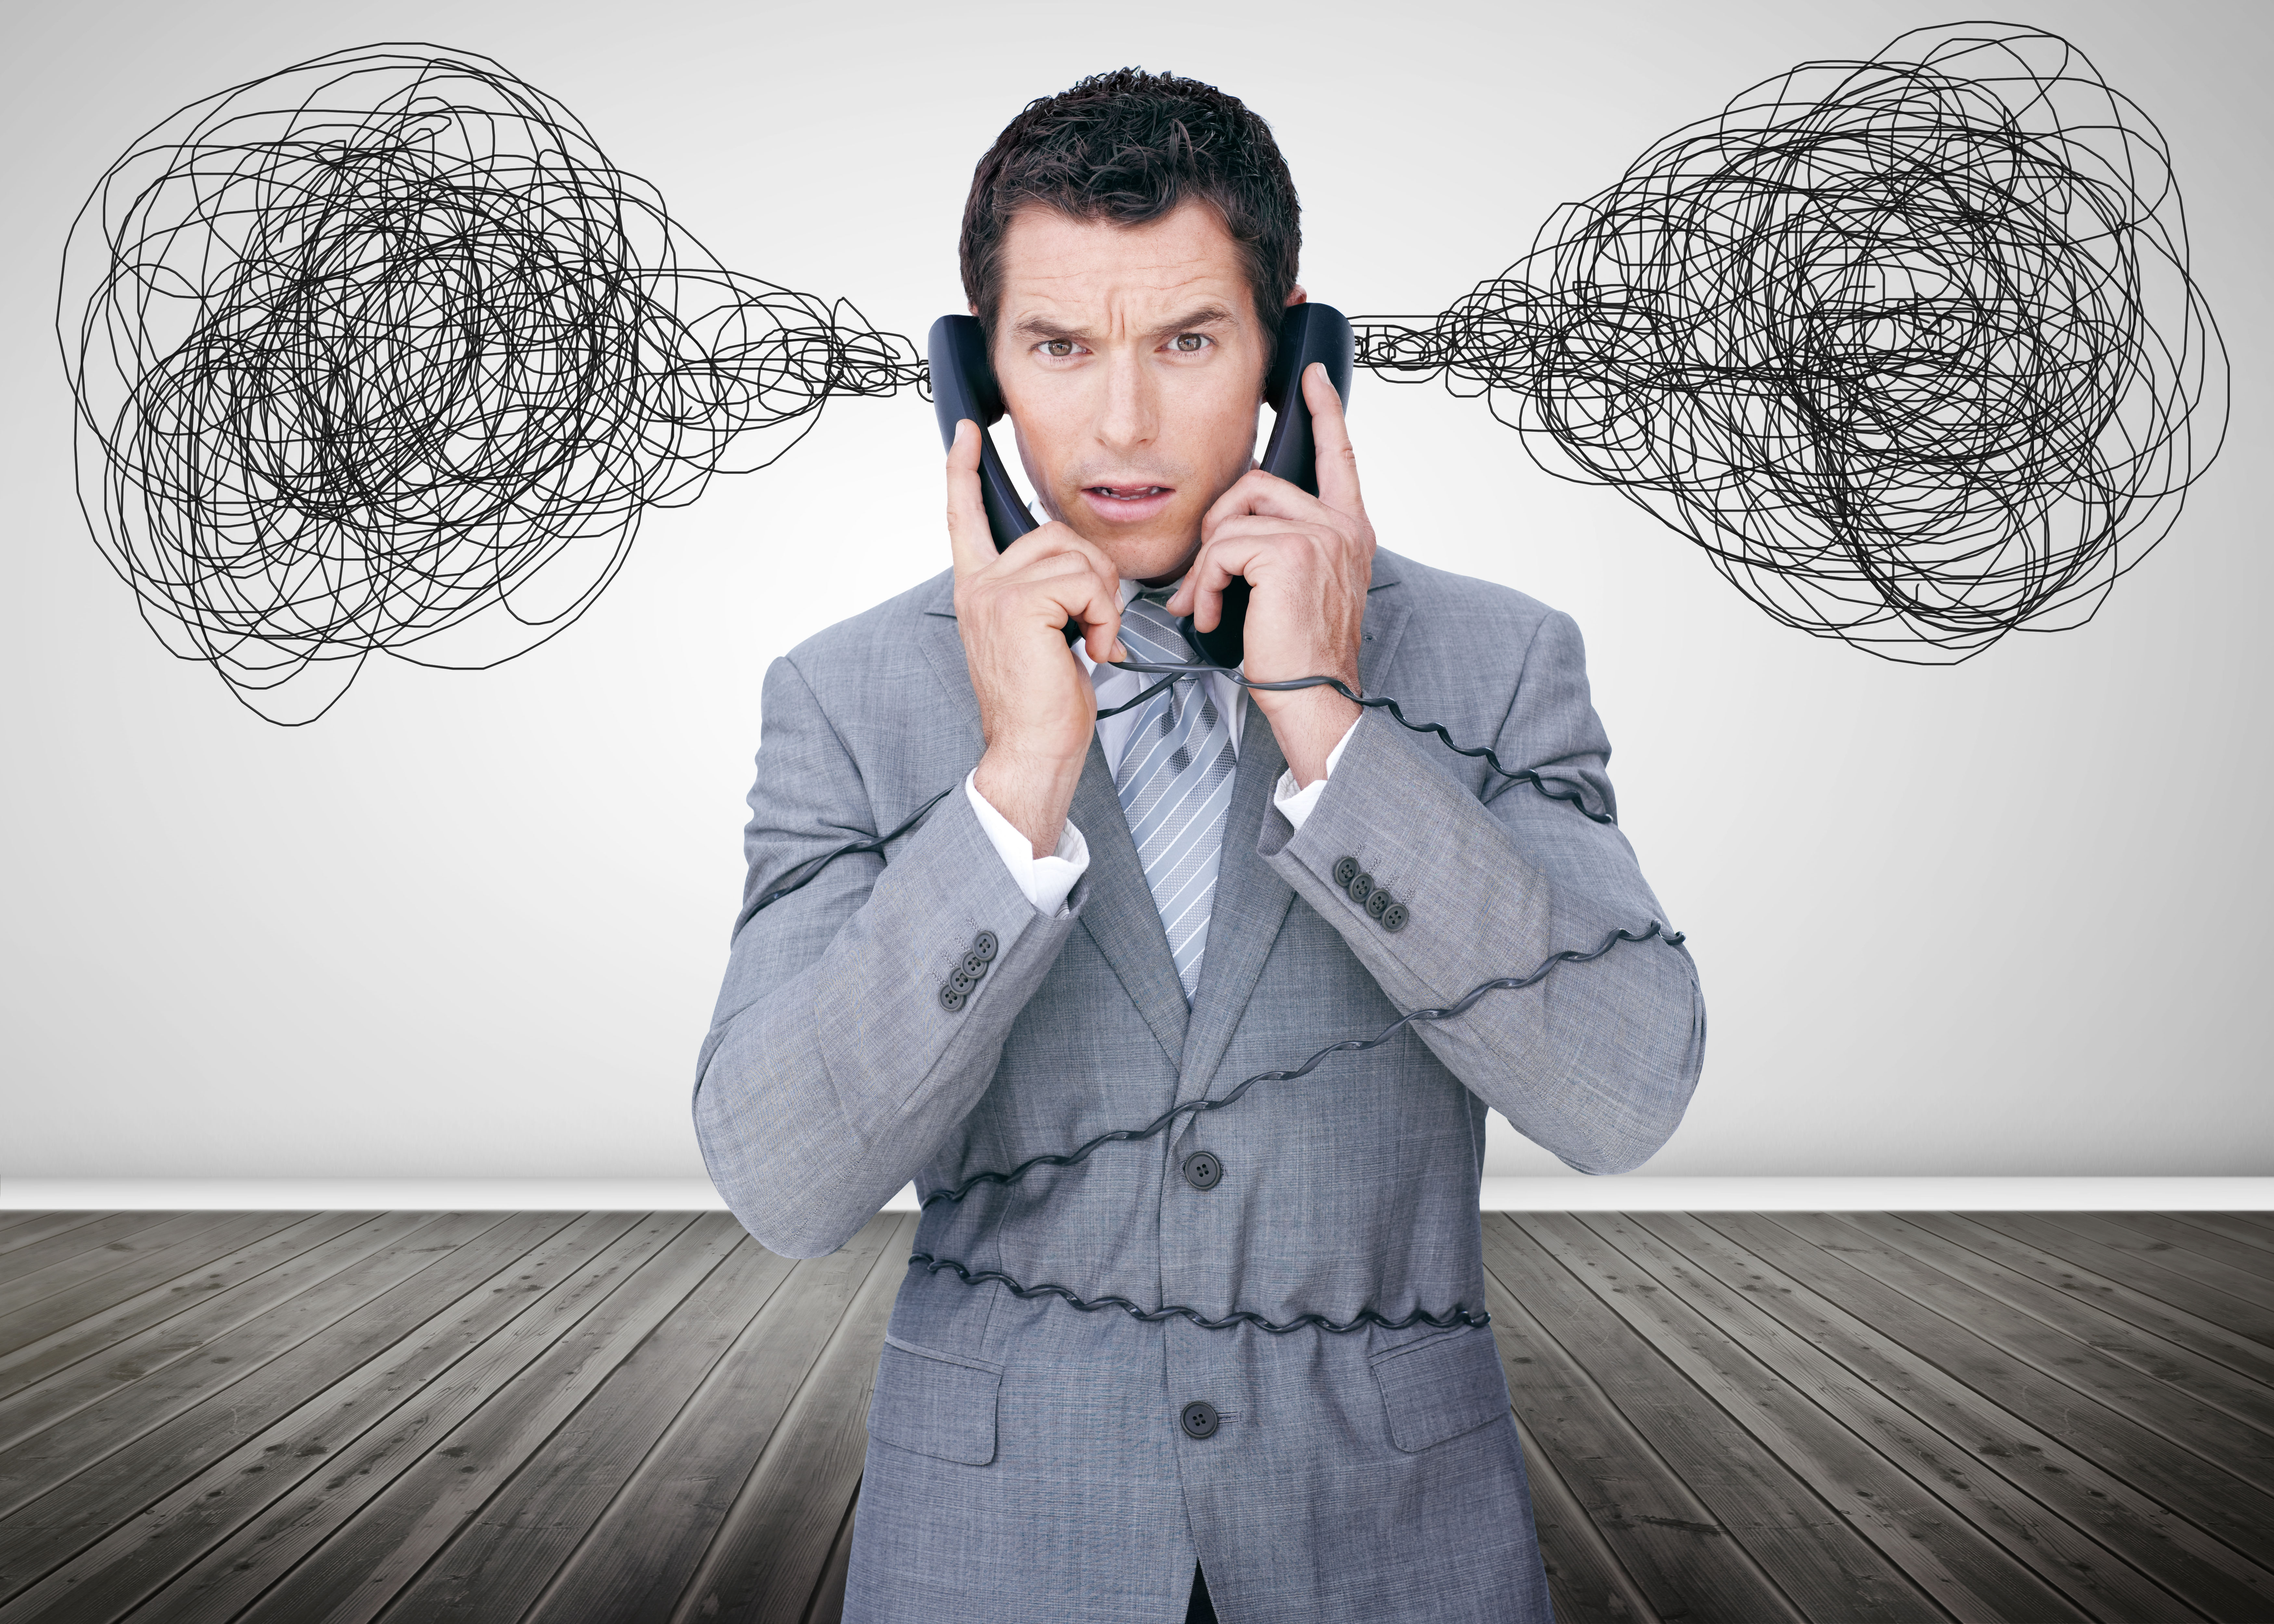 A man is listening to two separate phones and he has a cloud of confusion over his head